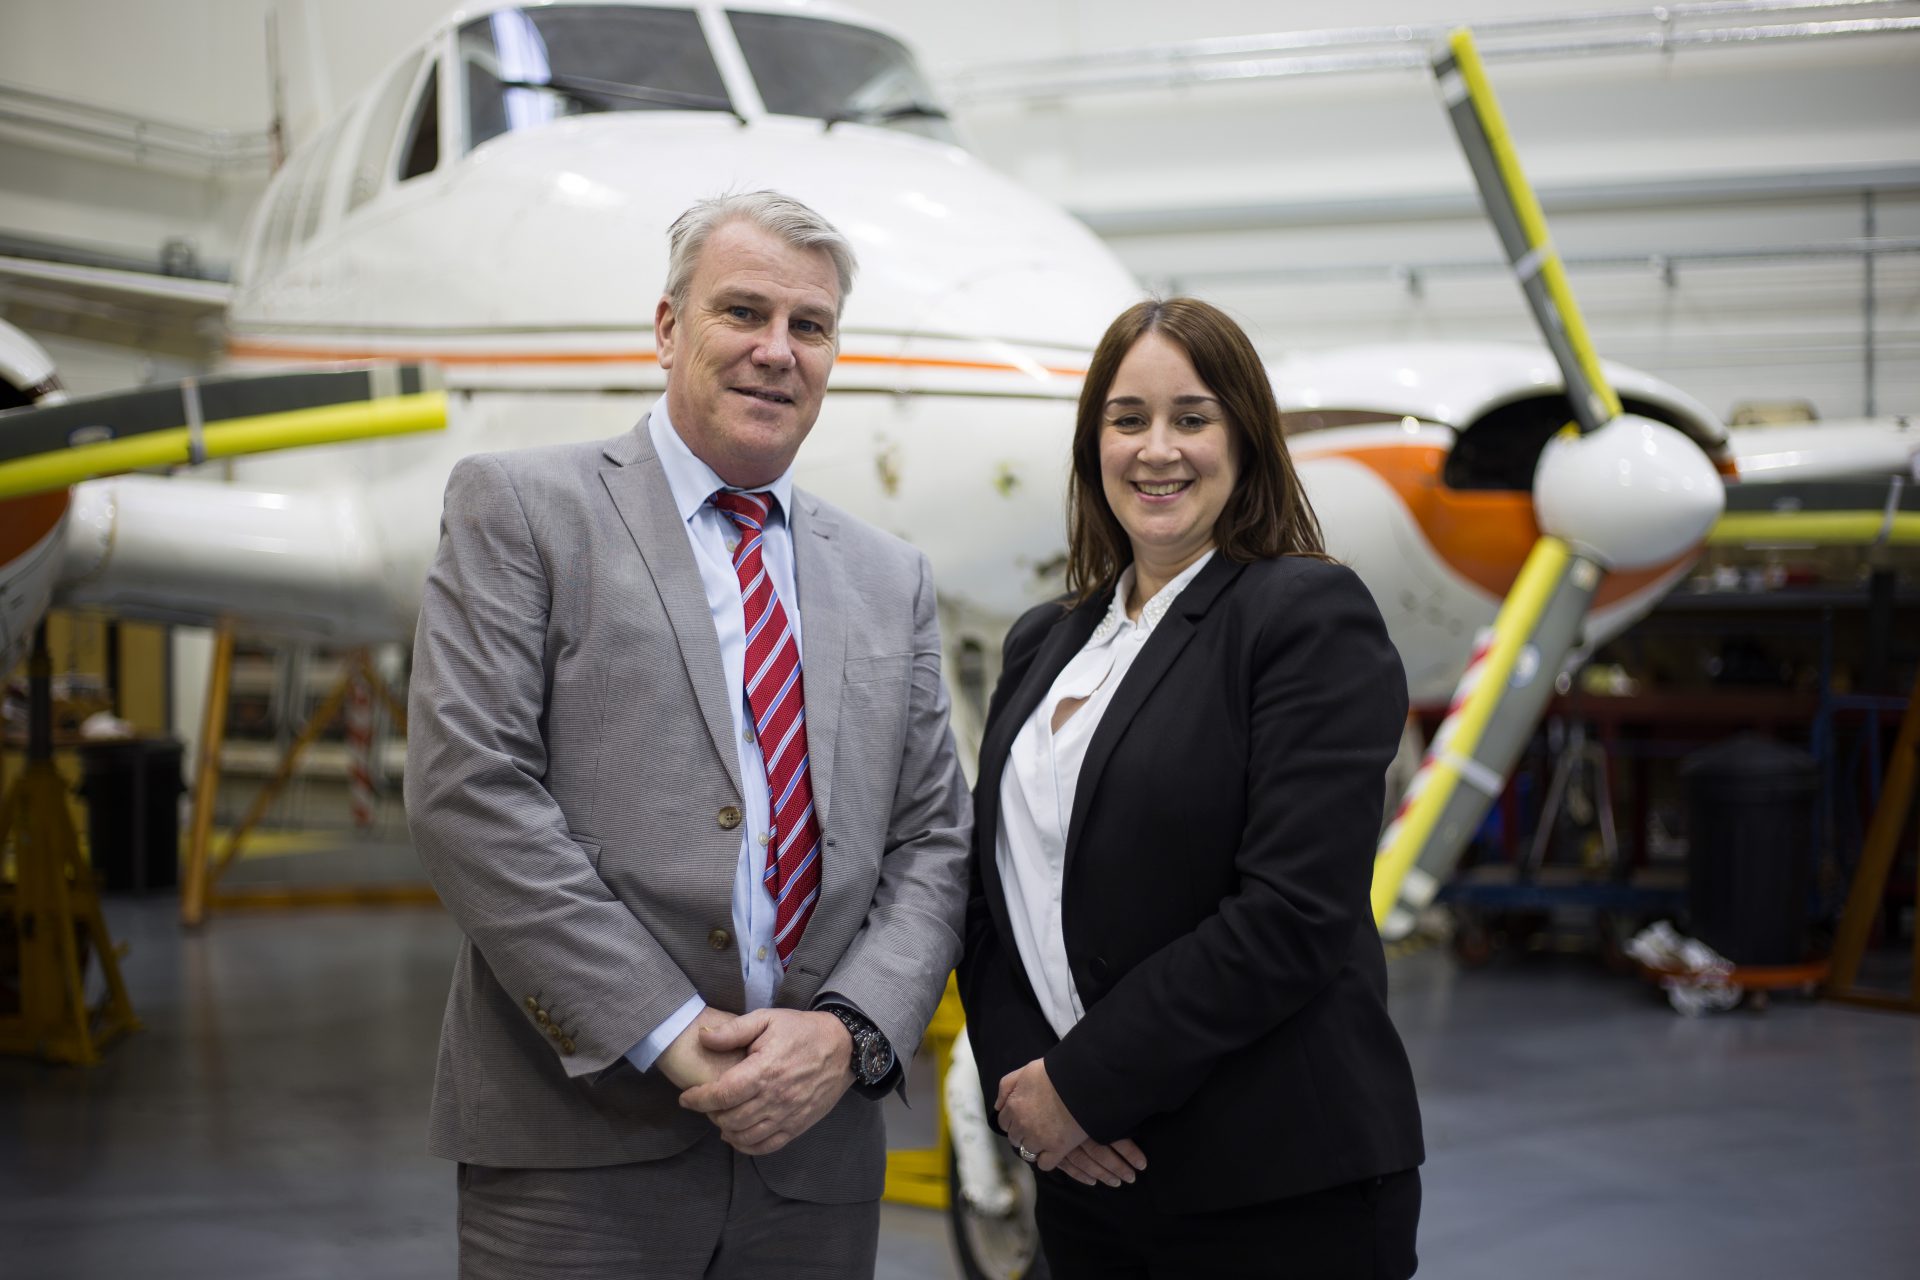 Richard Hyde, training leader, and Claire Thorogood, Director of Apprenticeships, at City of Bristol College standing infront of an airplane